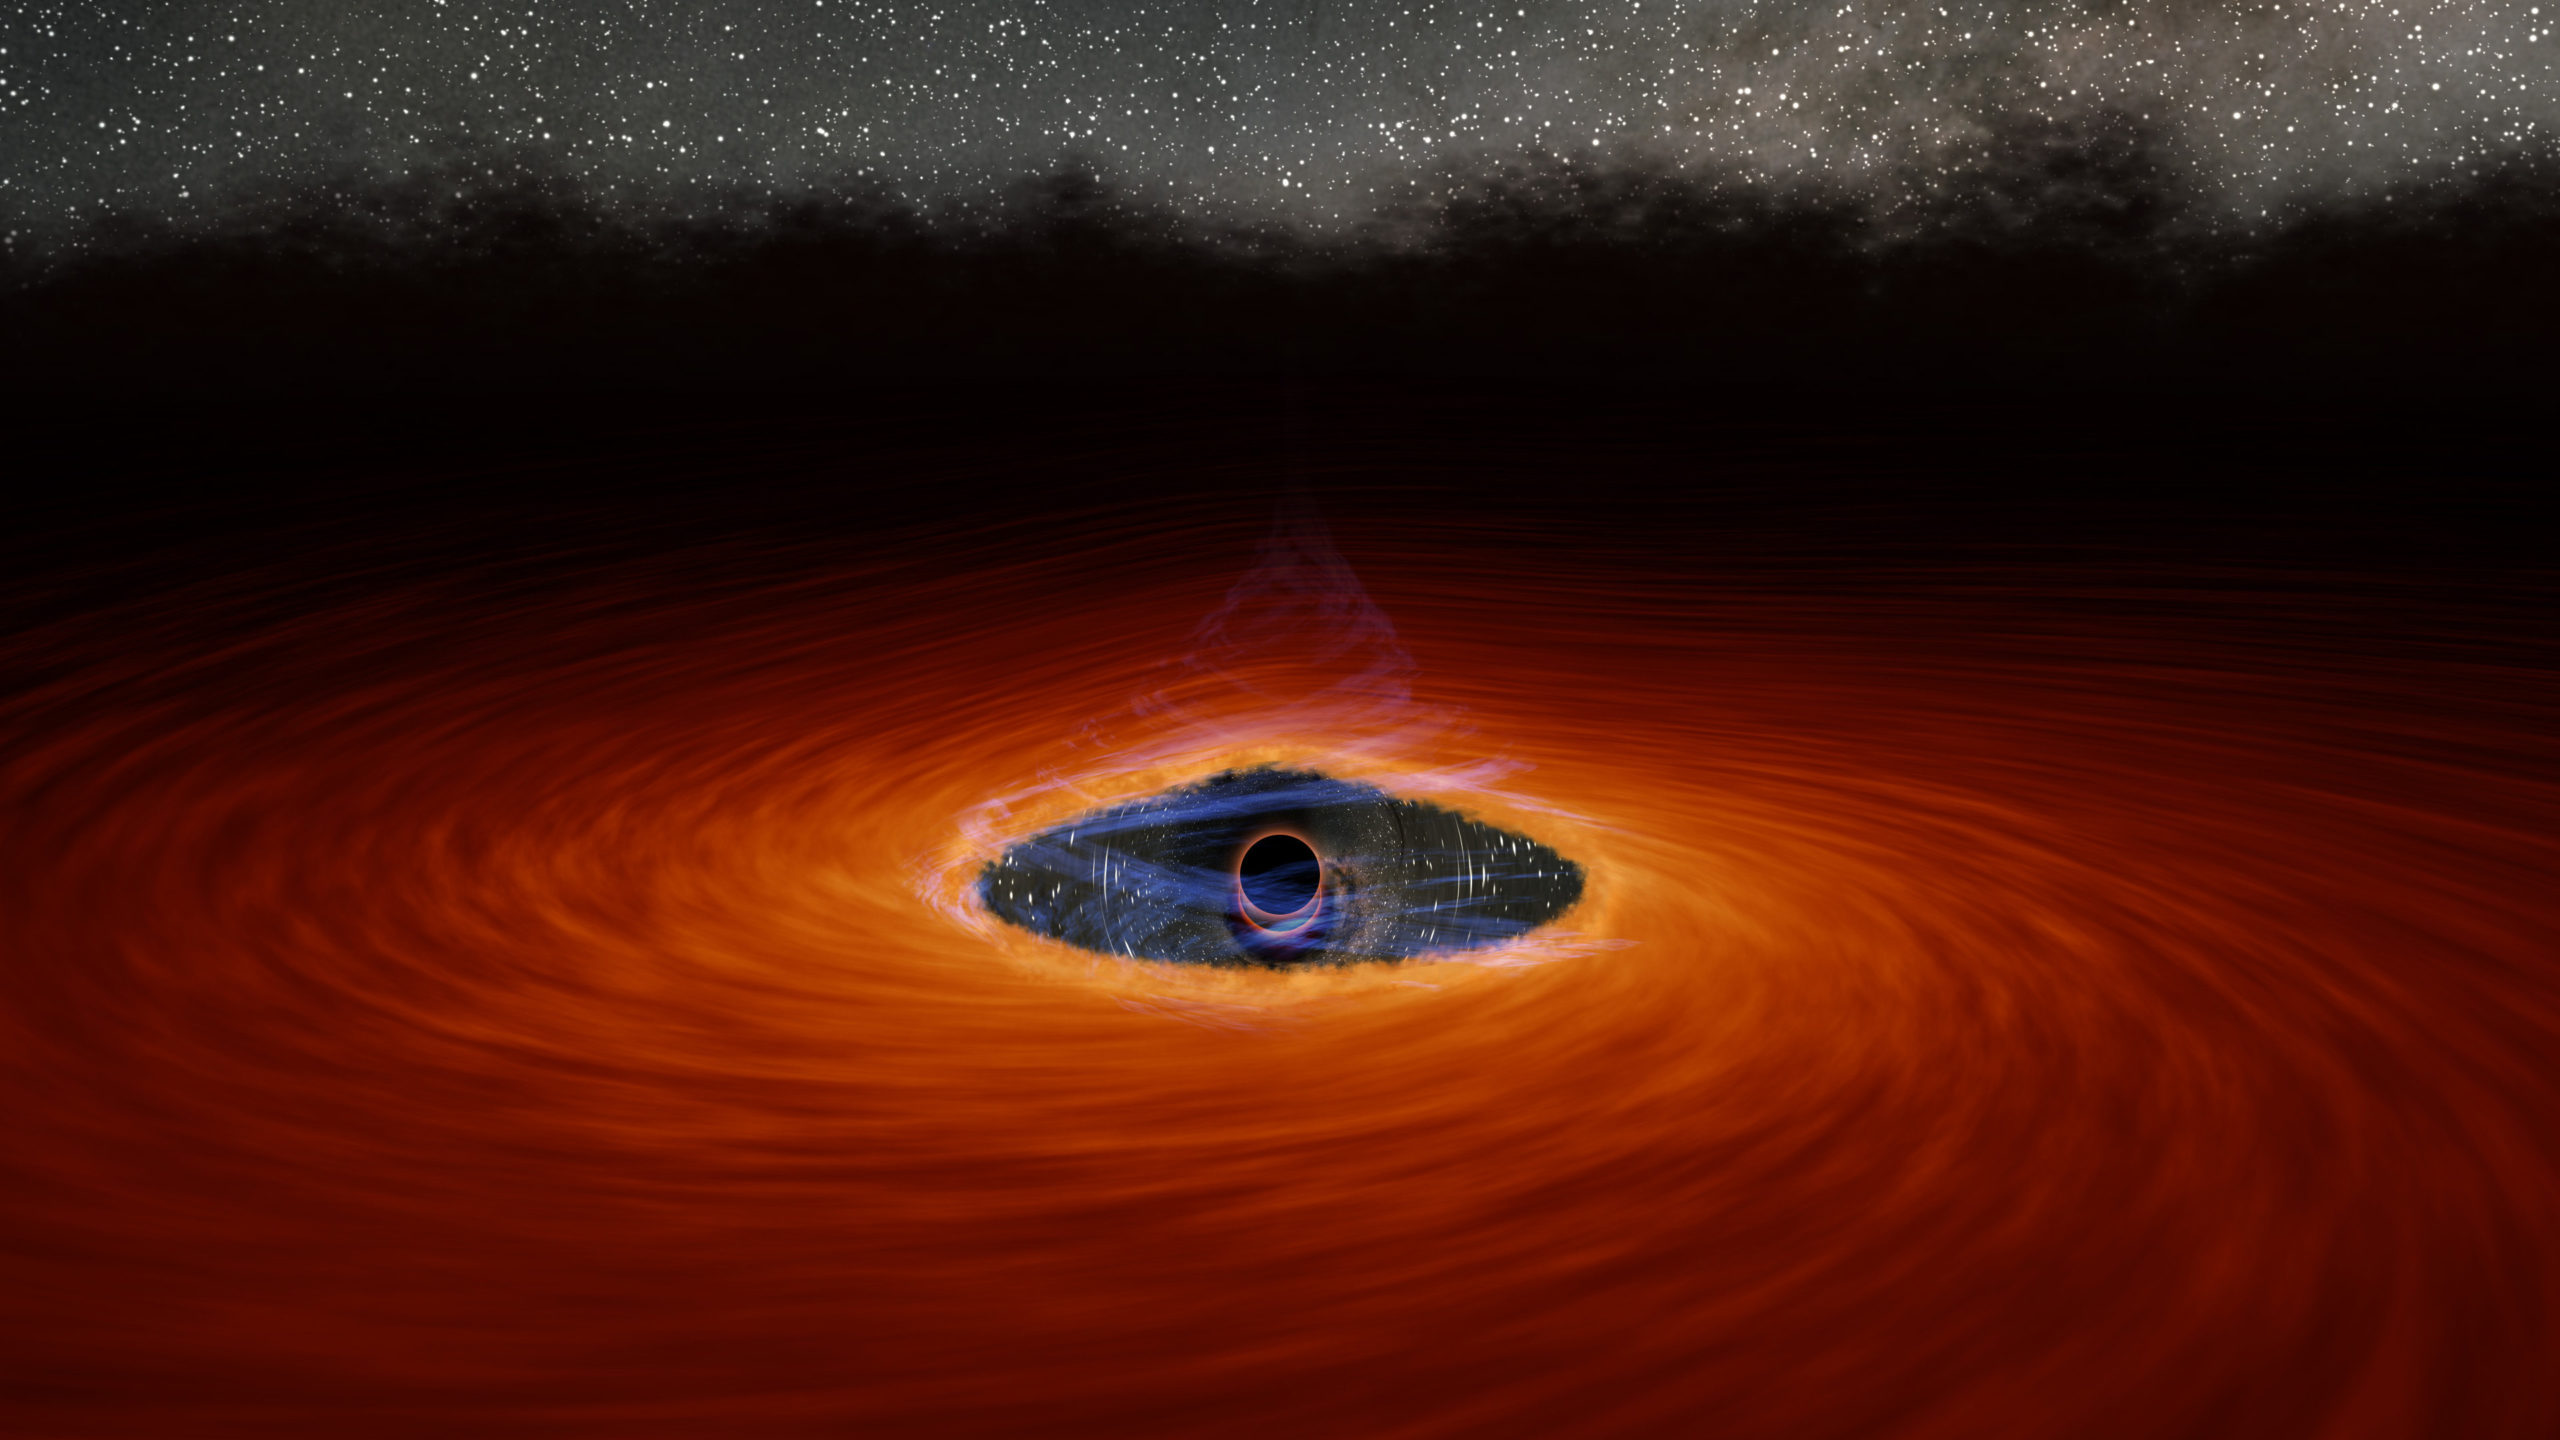 Artistic conception showing the destroyed corona and gap separating the black hole from the accretion disk.  (Image: NASA/JPL-Caltech)